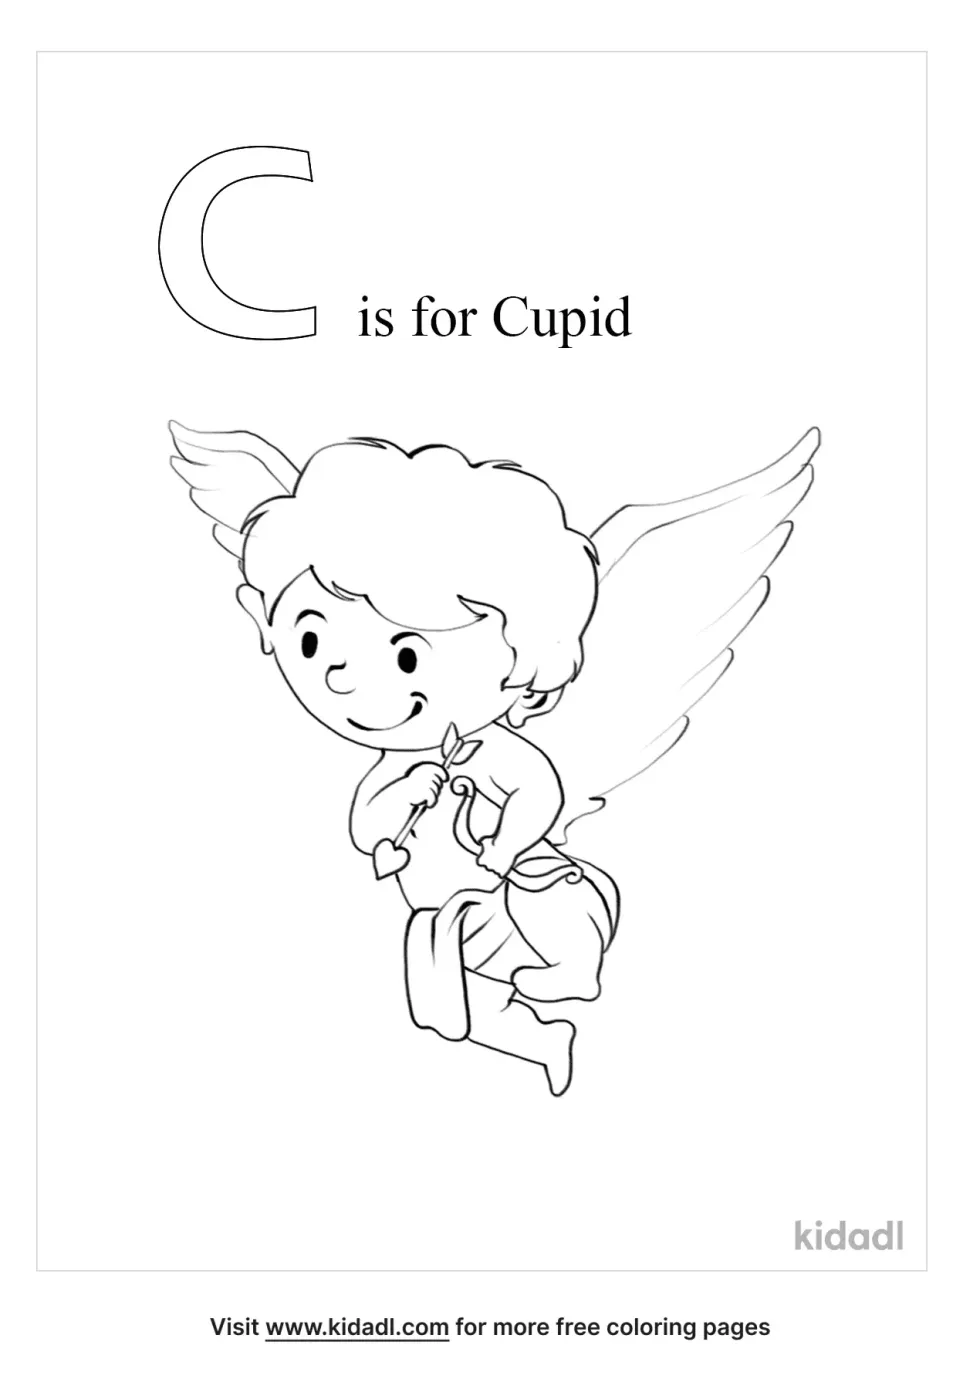 C Is For Cupid